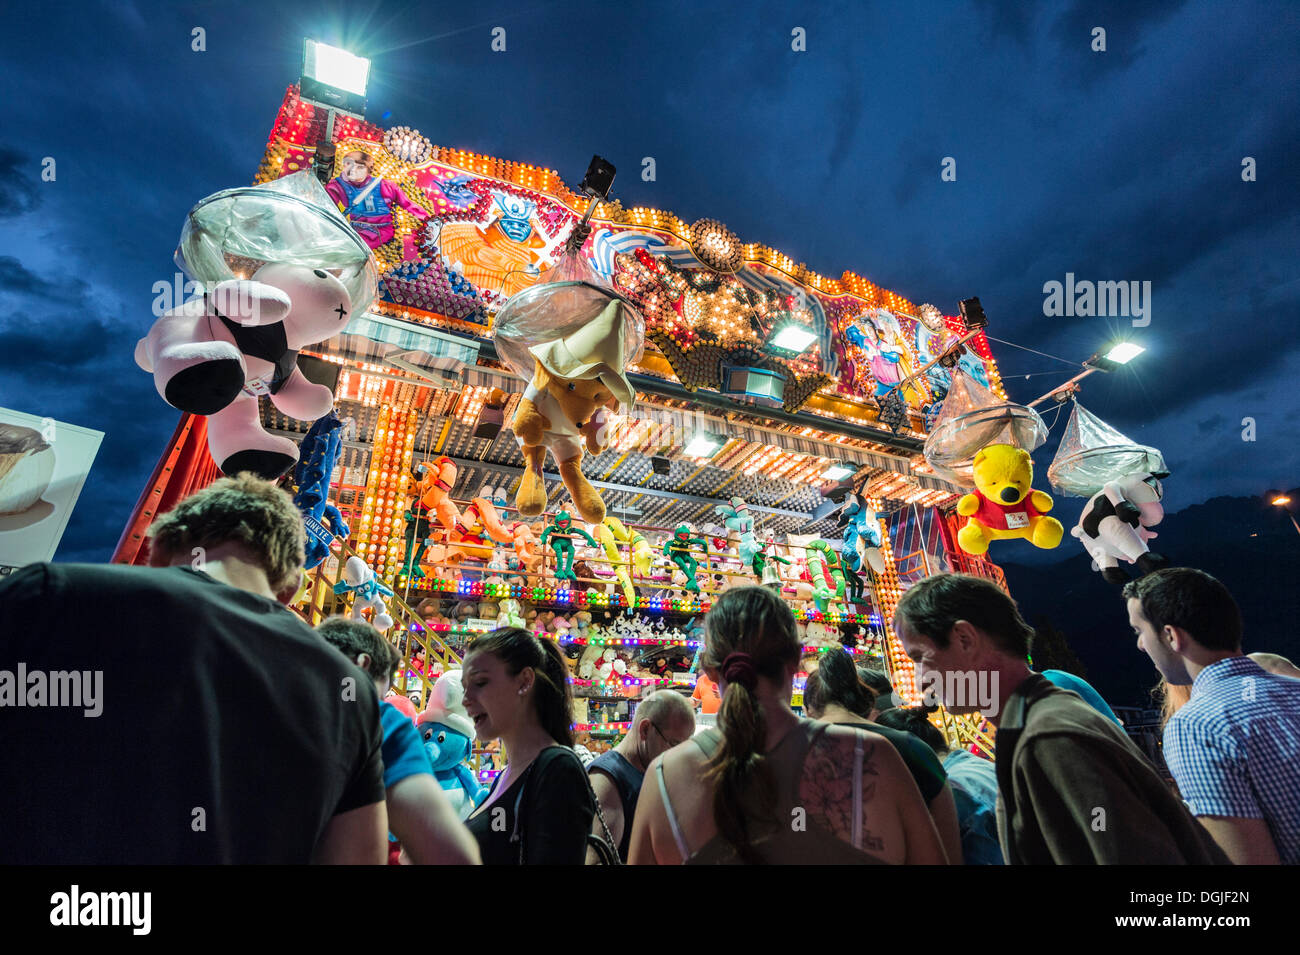 People standing in front of a shooting gallery, Suedring amusement park, Innsbruck, Tyrol, Austria, Europe Stock Photo